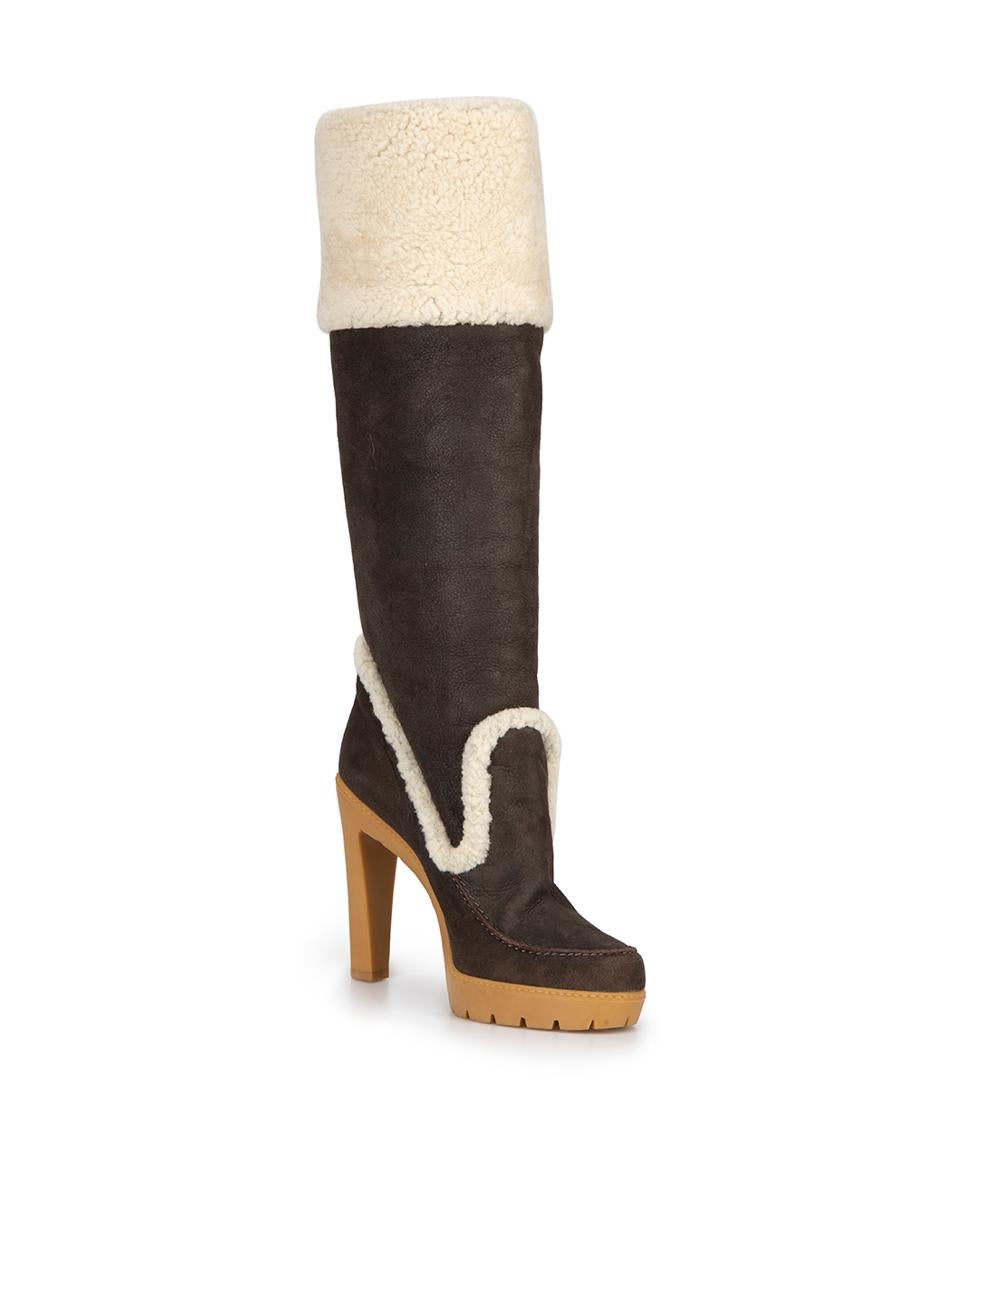 CONDITION is Never Worn. Small mark on inside cuff of right boot and dark mark is visible at the outer side of the left shoe heel on this used Dior designer resale item.



Details


Brown

Suede

Knee high boots

Round toe

Platform high